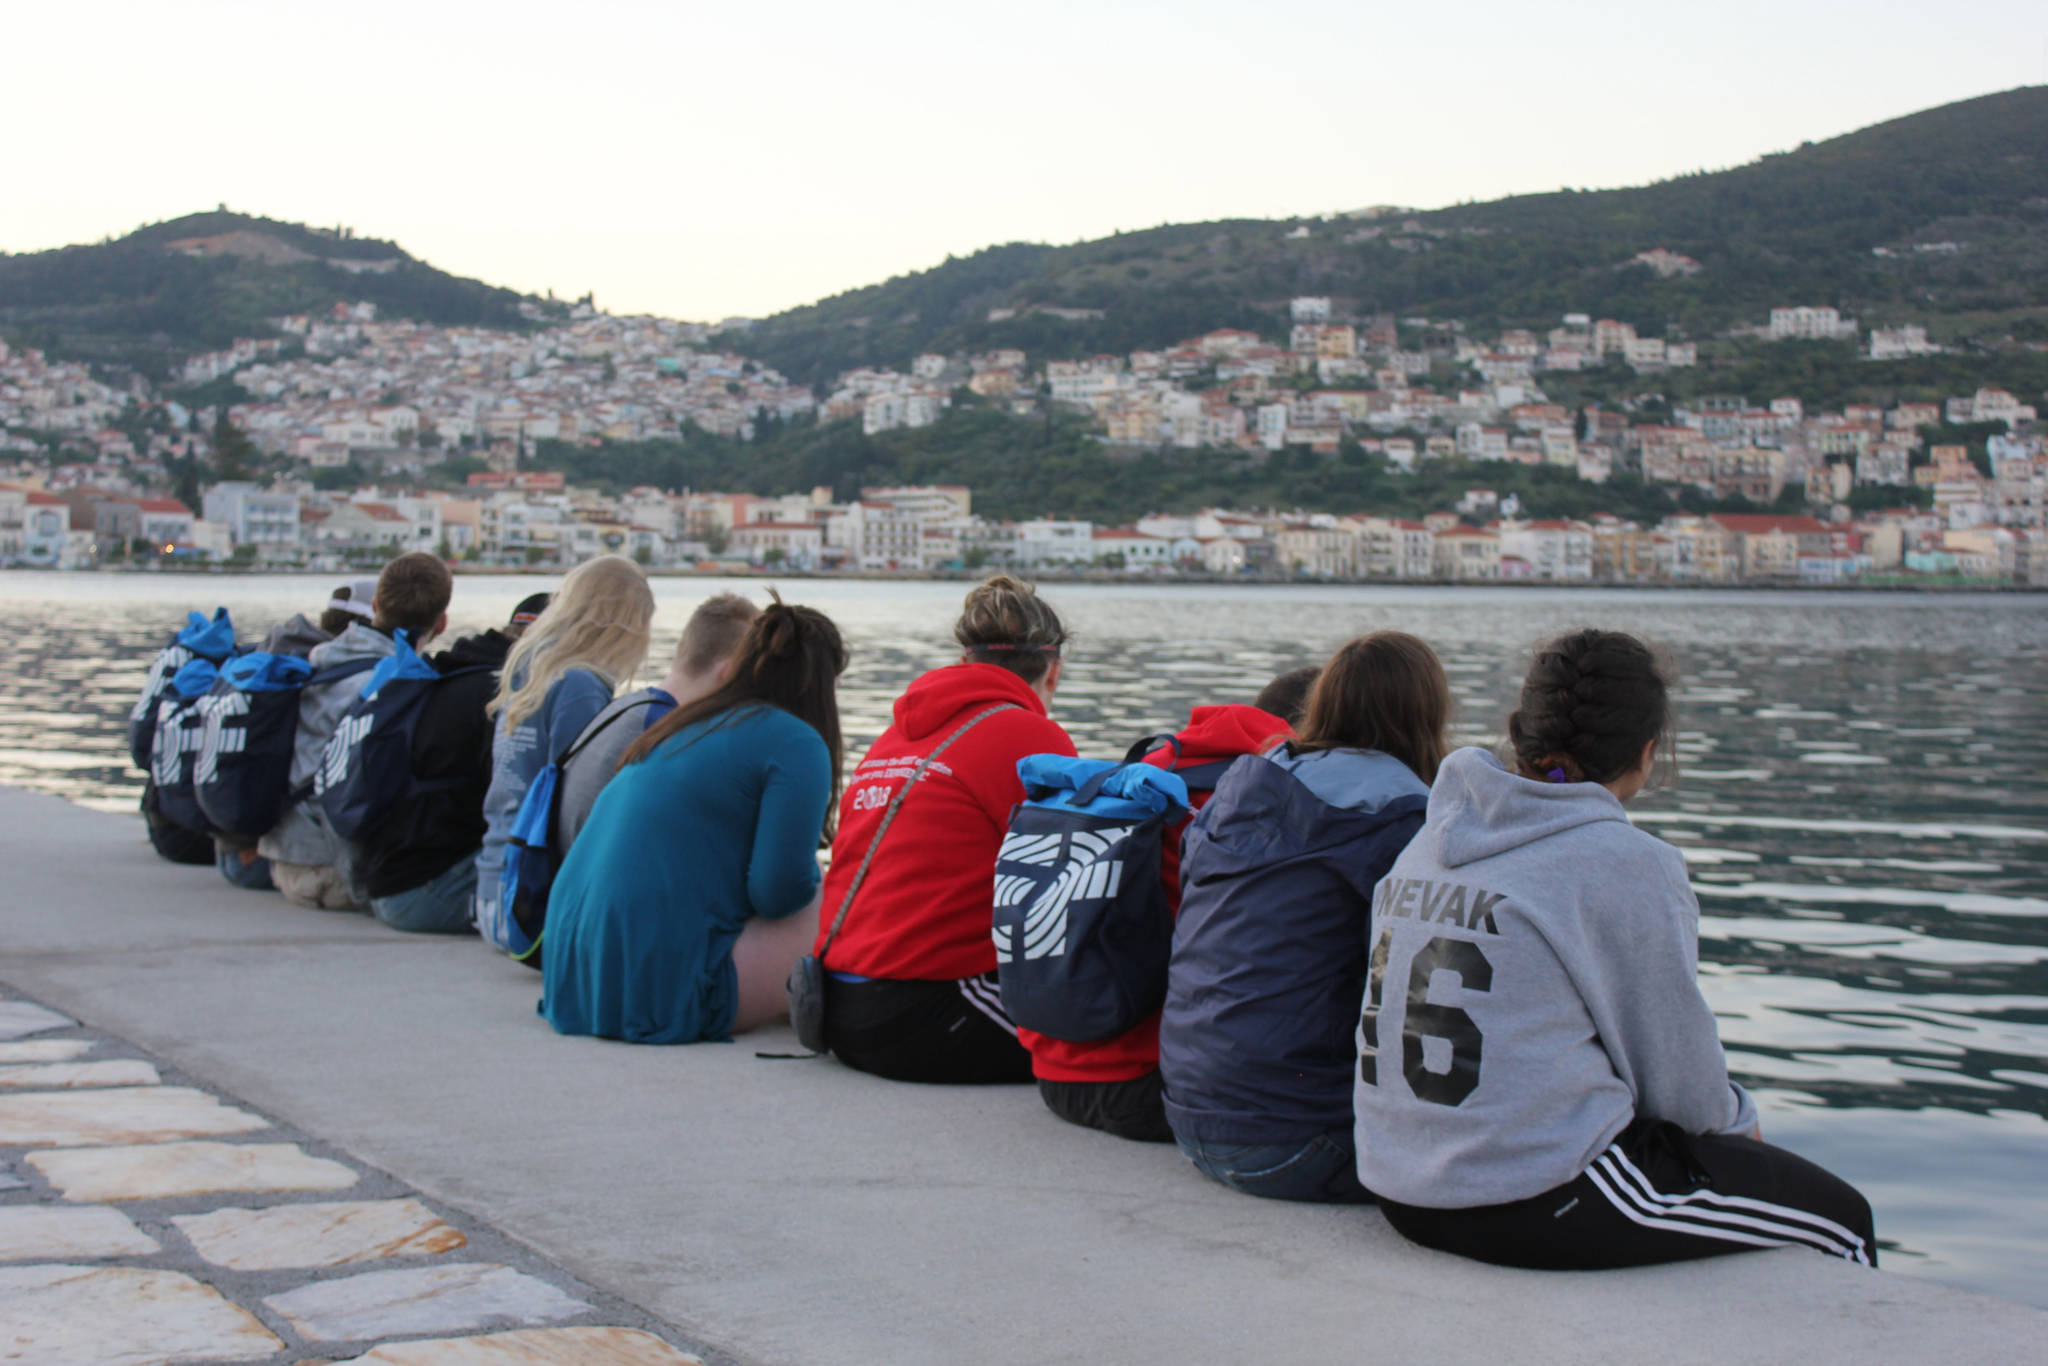 Students from Michigan and Homer look out over the water during their recent trip to Greece in April. (Photo provided)